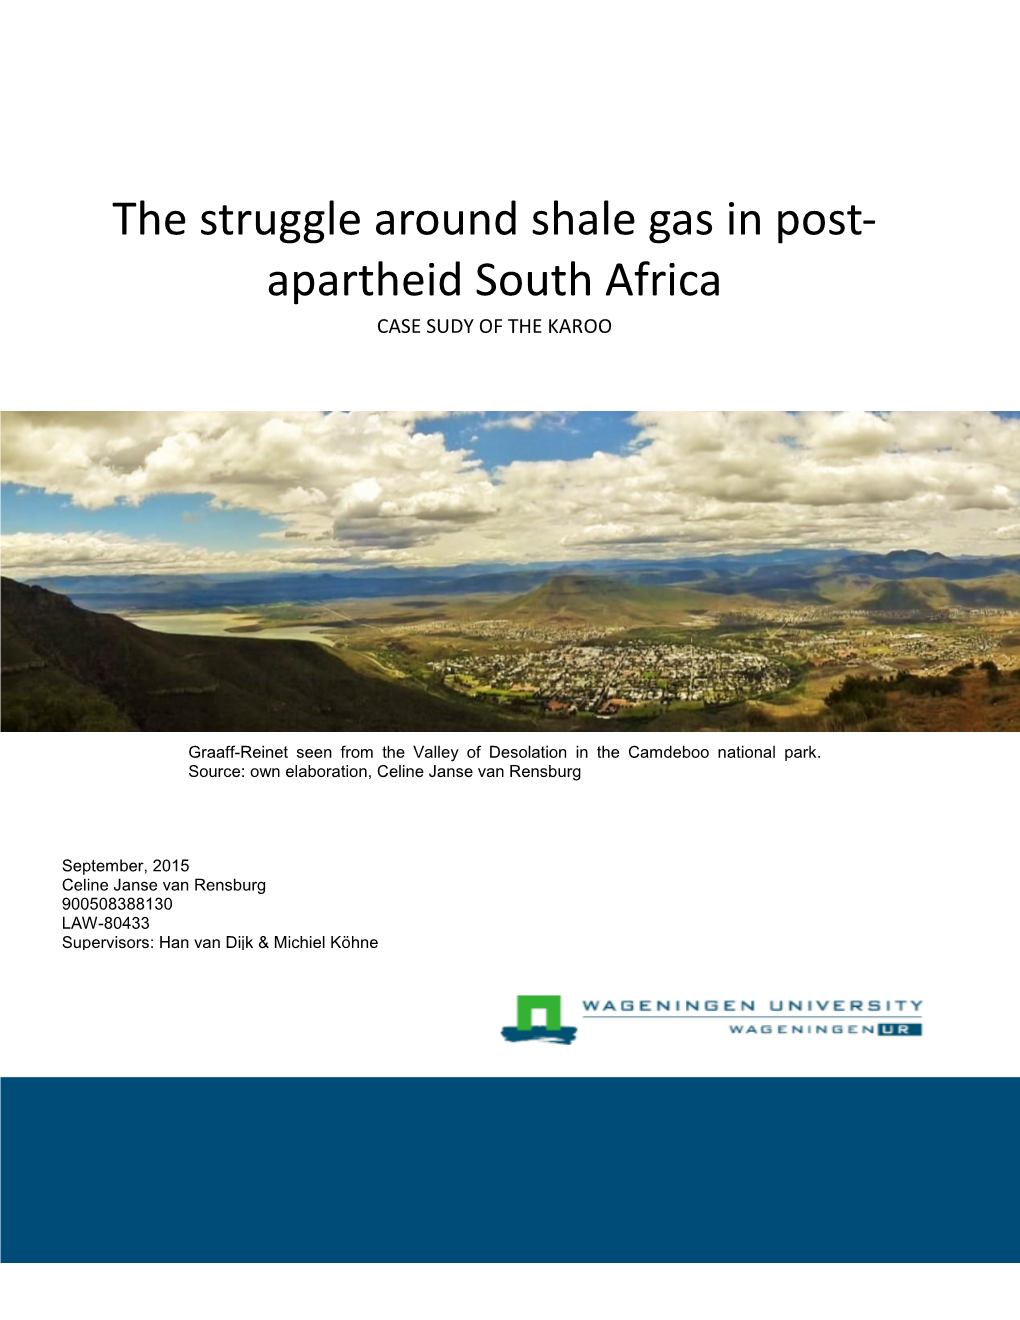 The Struggle Around Shale Gas in Post-Apartheid South Africa Case Study of the Karoo